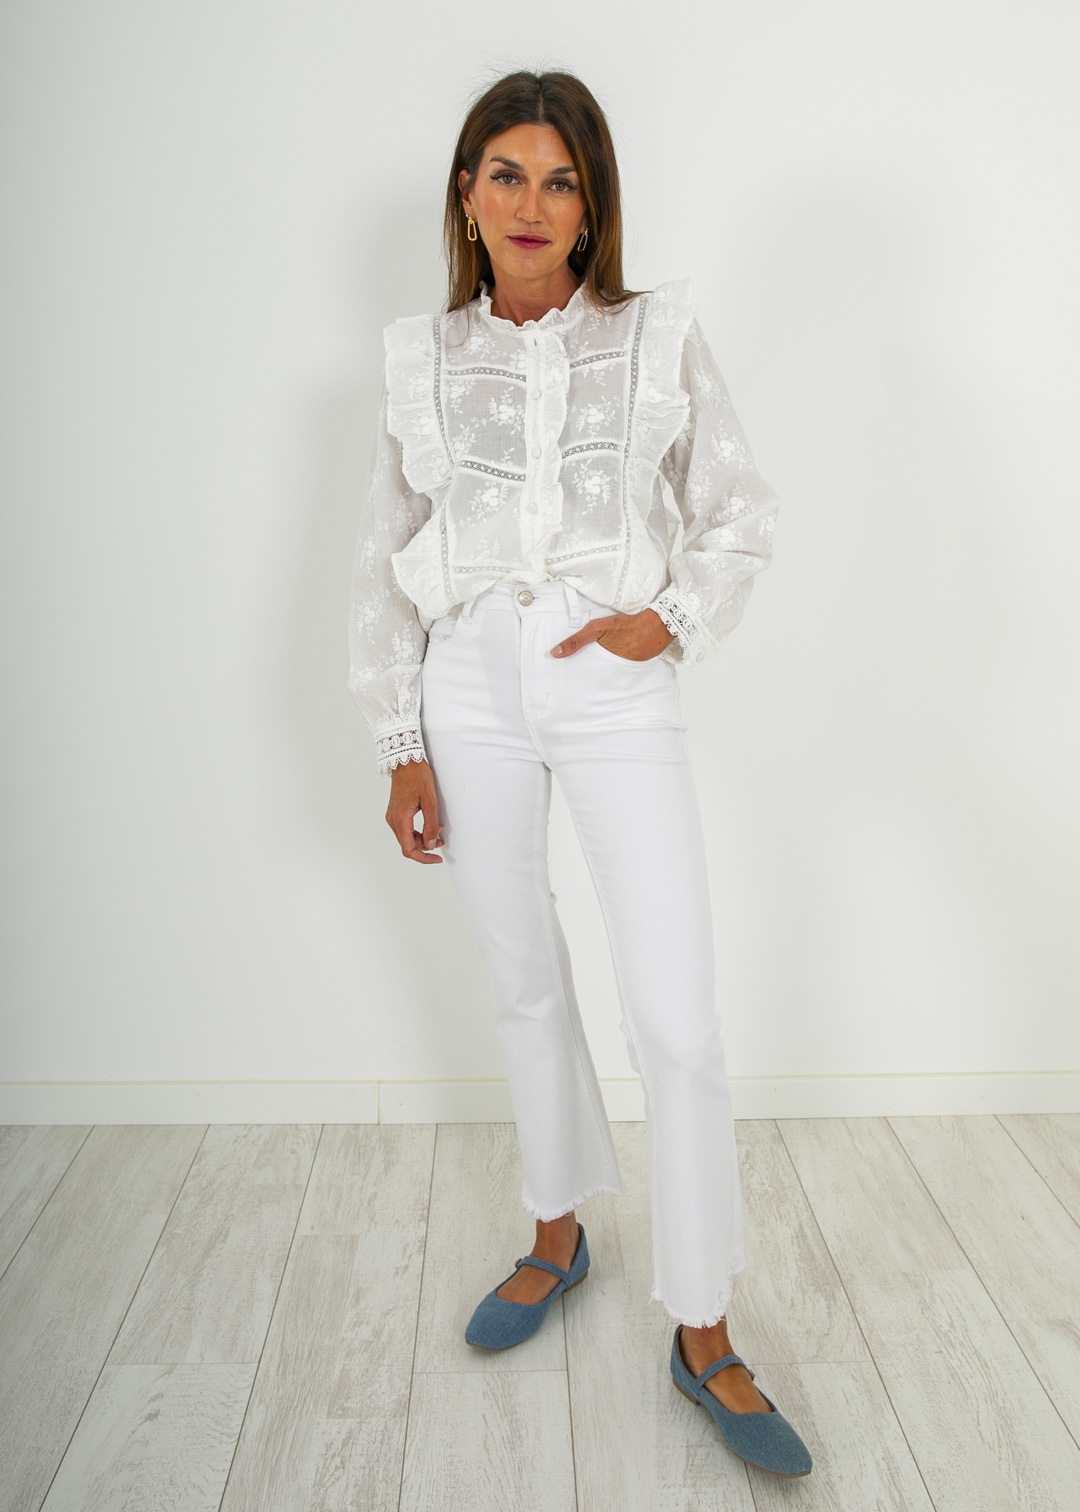 WHITE EMBROIDERED FLORAL SHIRT